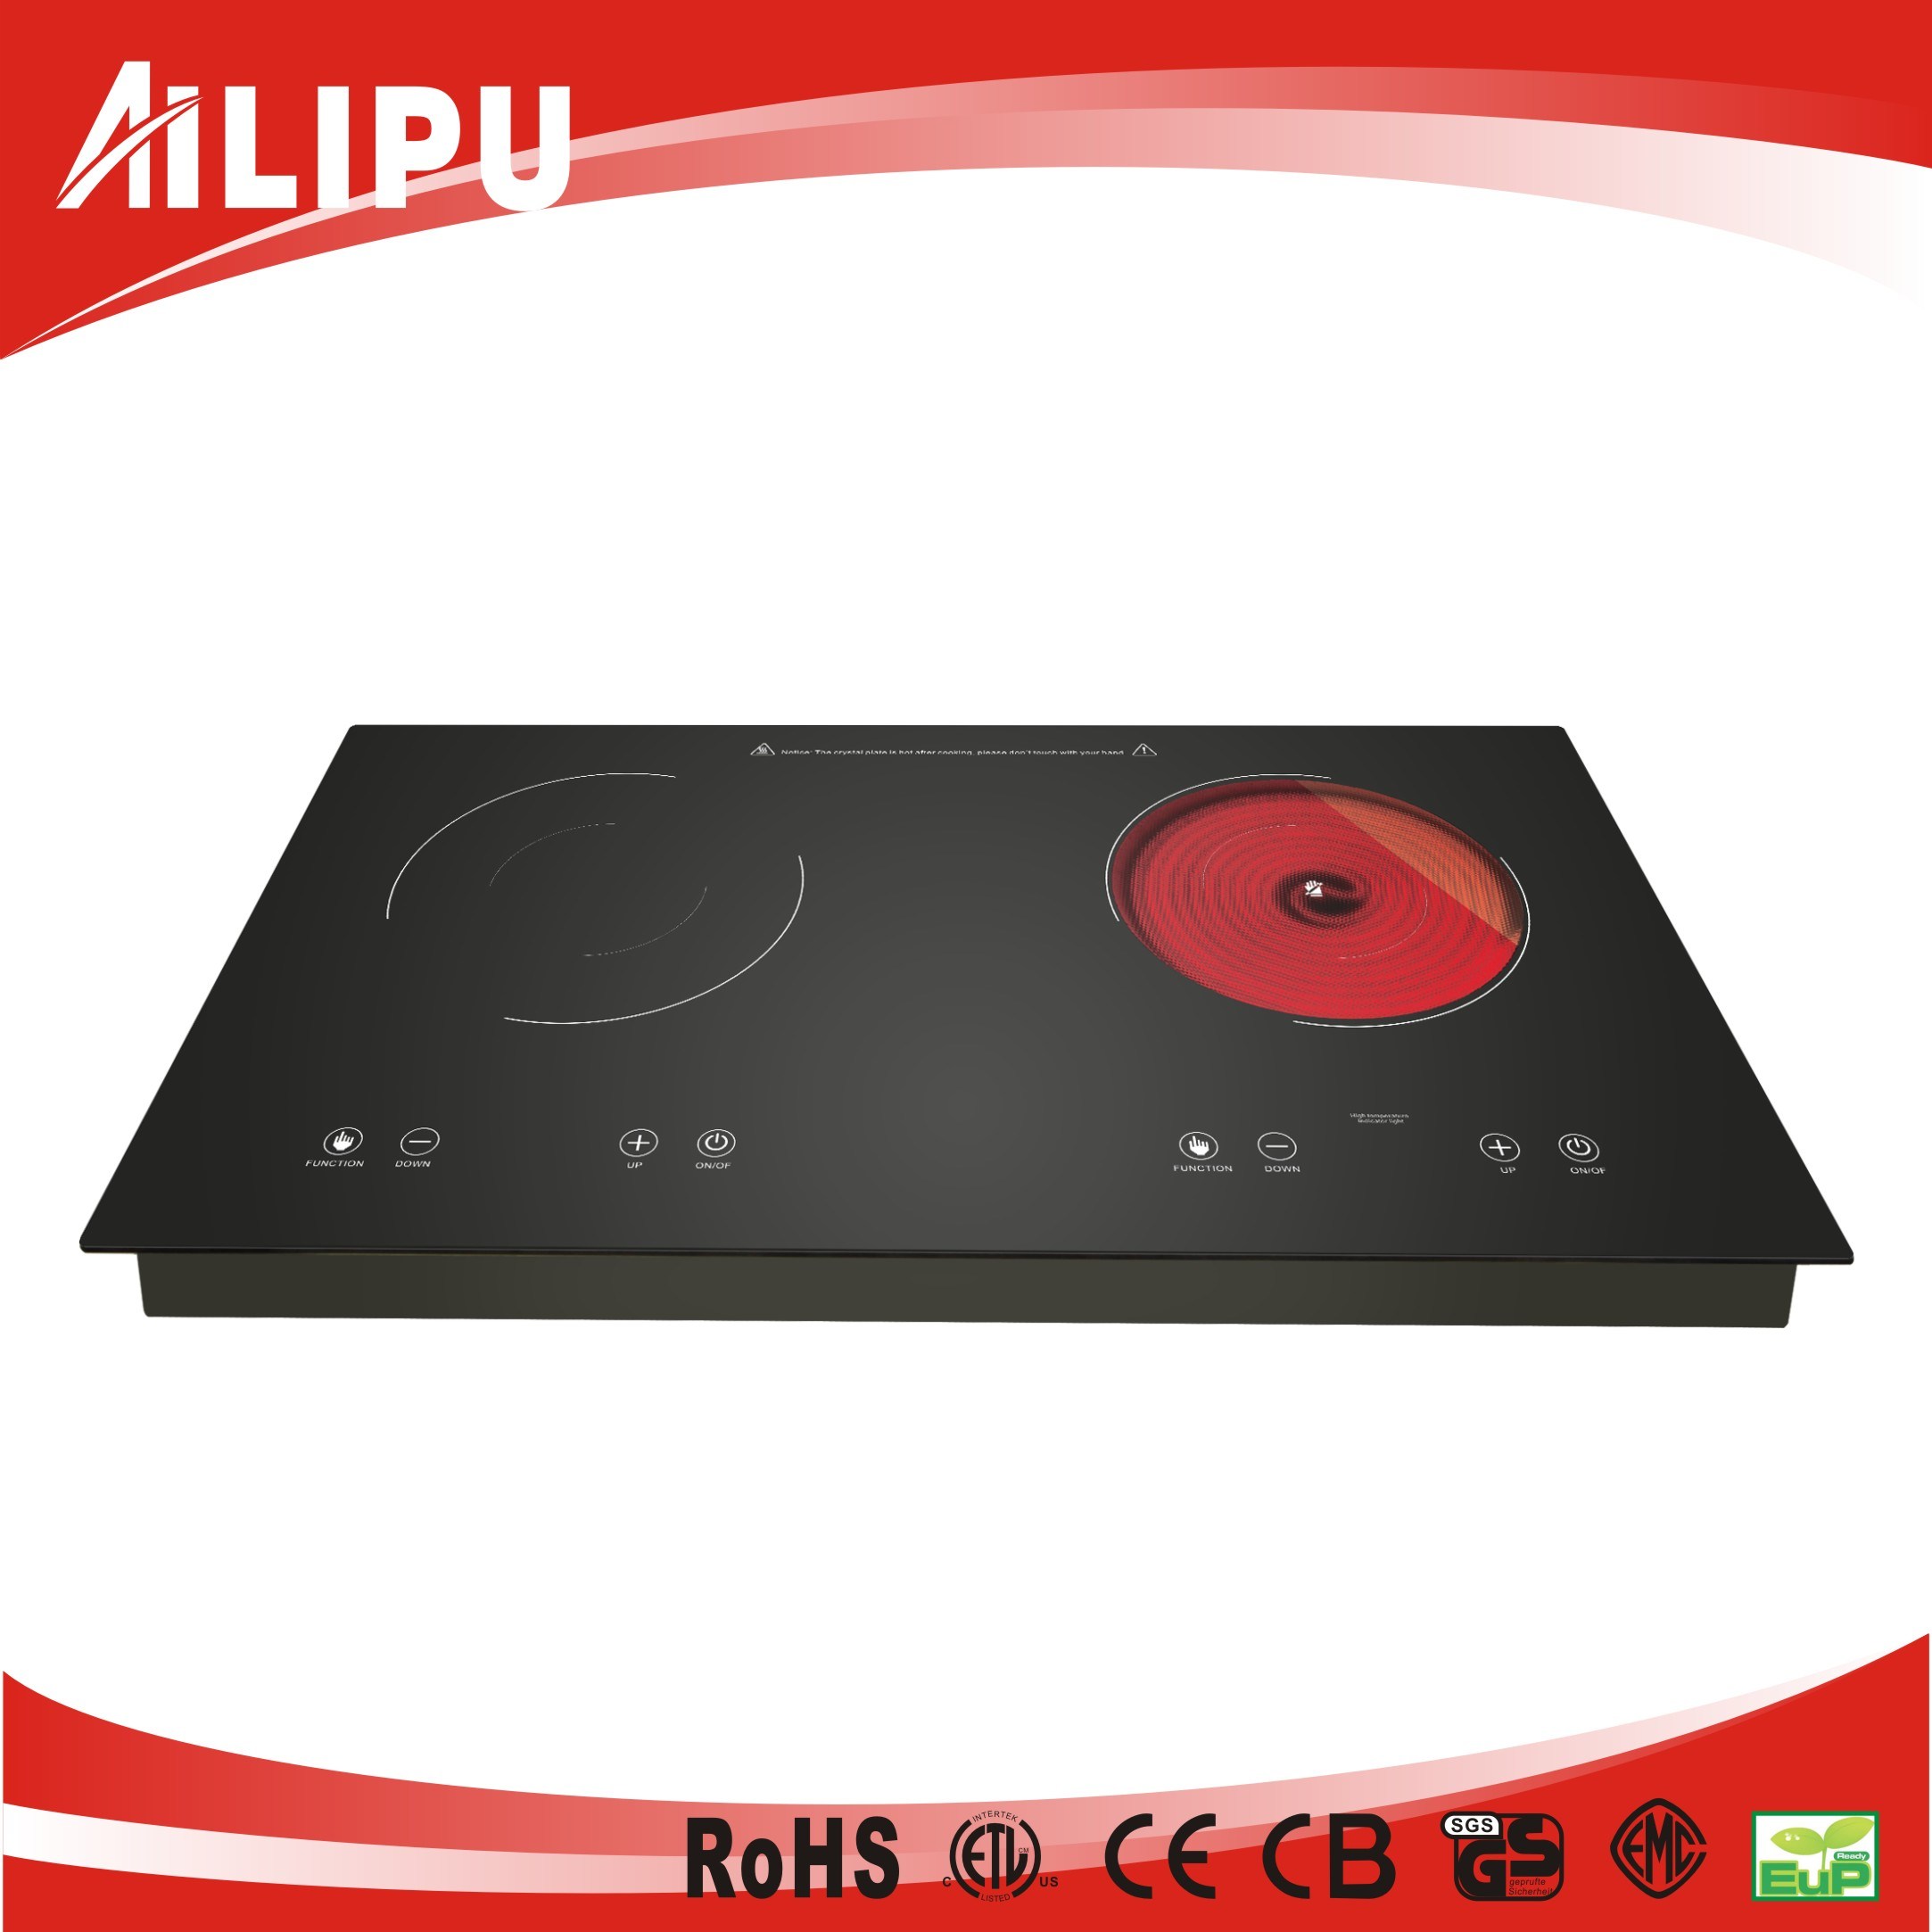 Built-in Induction Cooker+Infrared Cooker Sm-Dic09-1